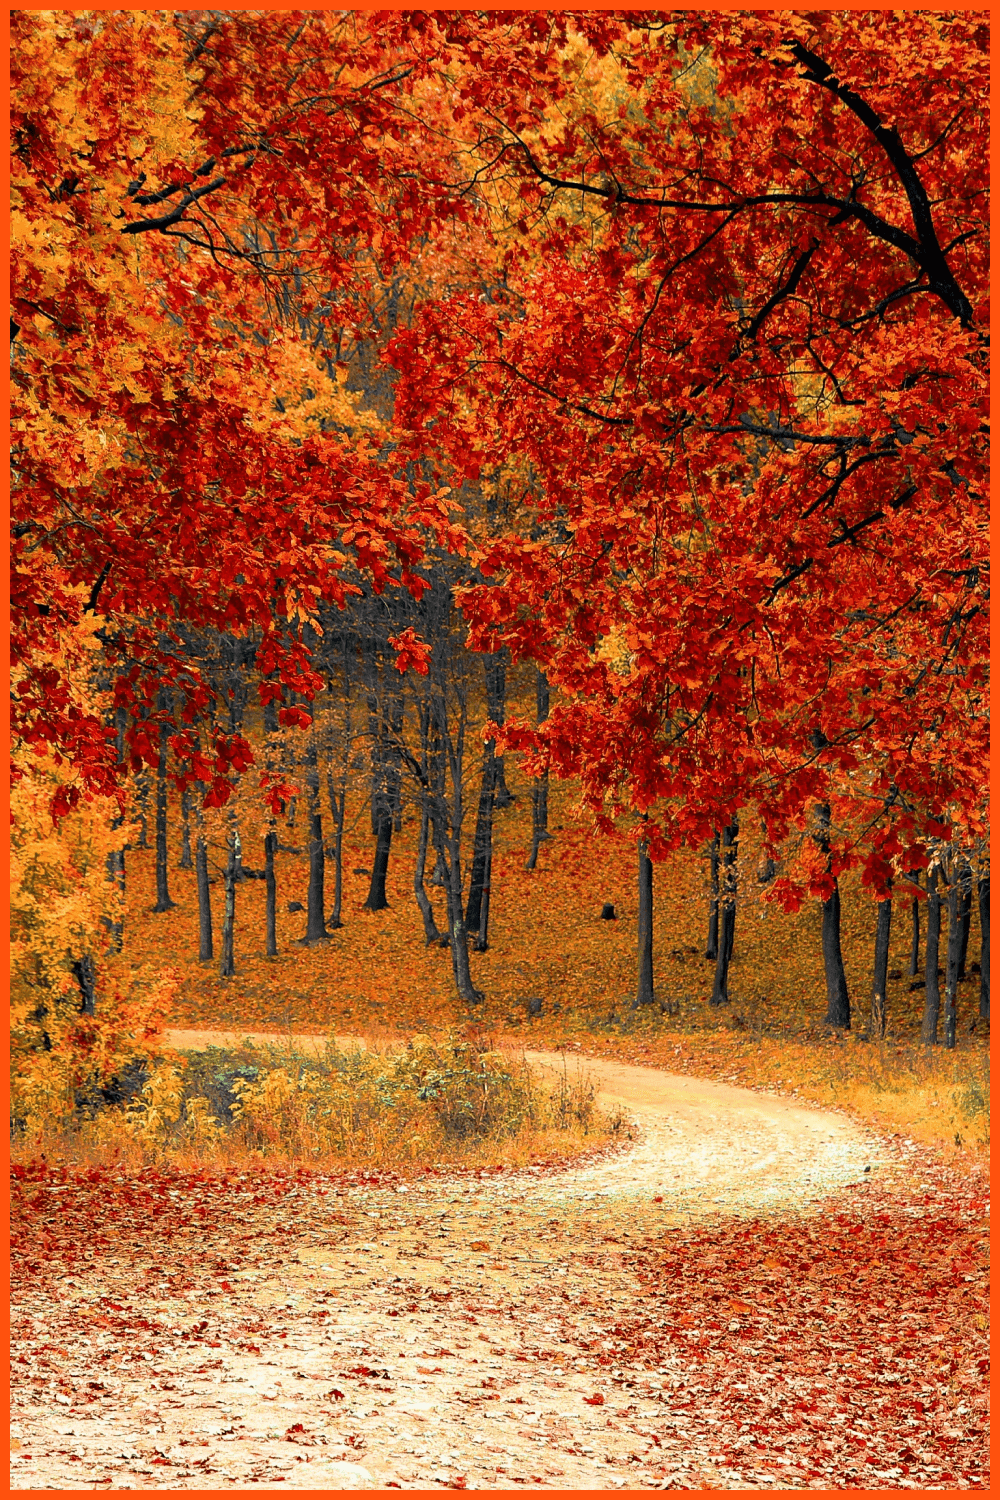 Autumn forest with a road along yellow and red trees.